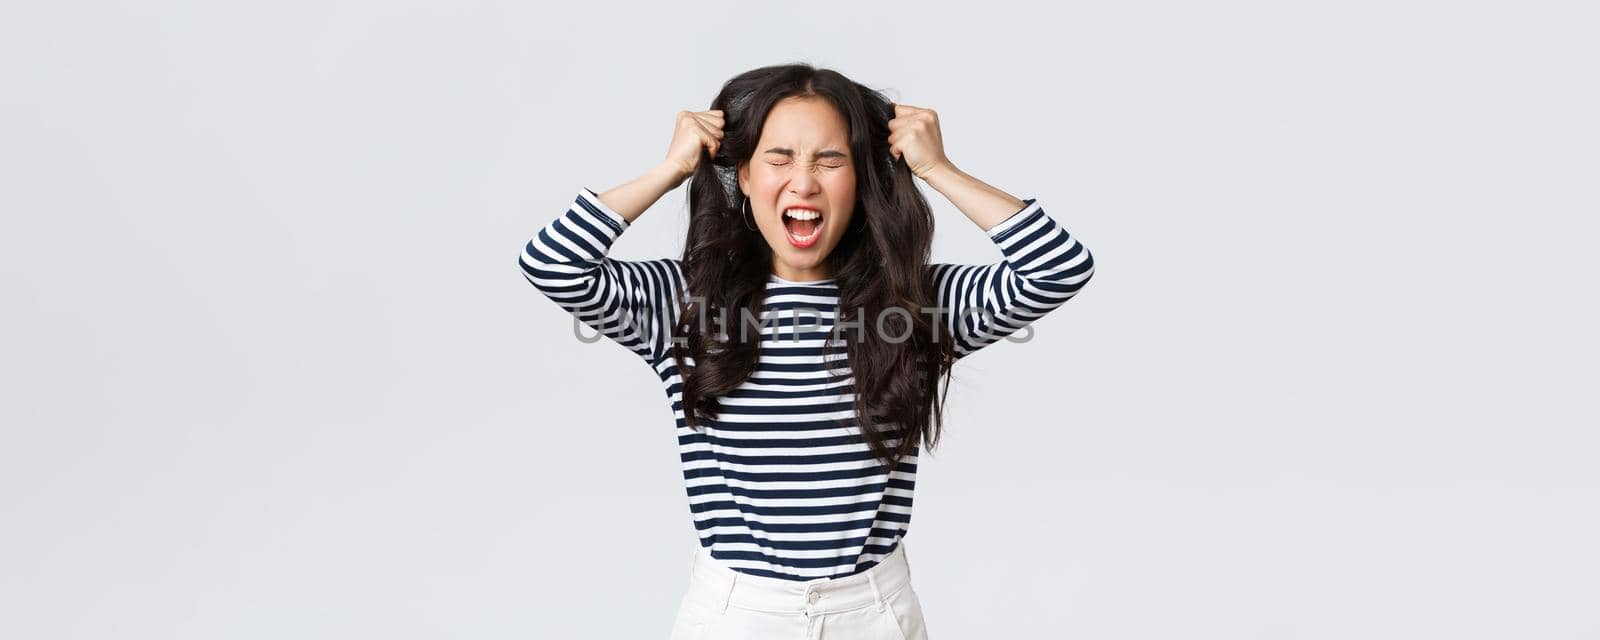 Lifestyle, people emotions and casual concept. Pissed-off mad and angry asian young woman tossing hair, pulling it from head with screams and closed eyes, standing bothered white background.